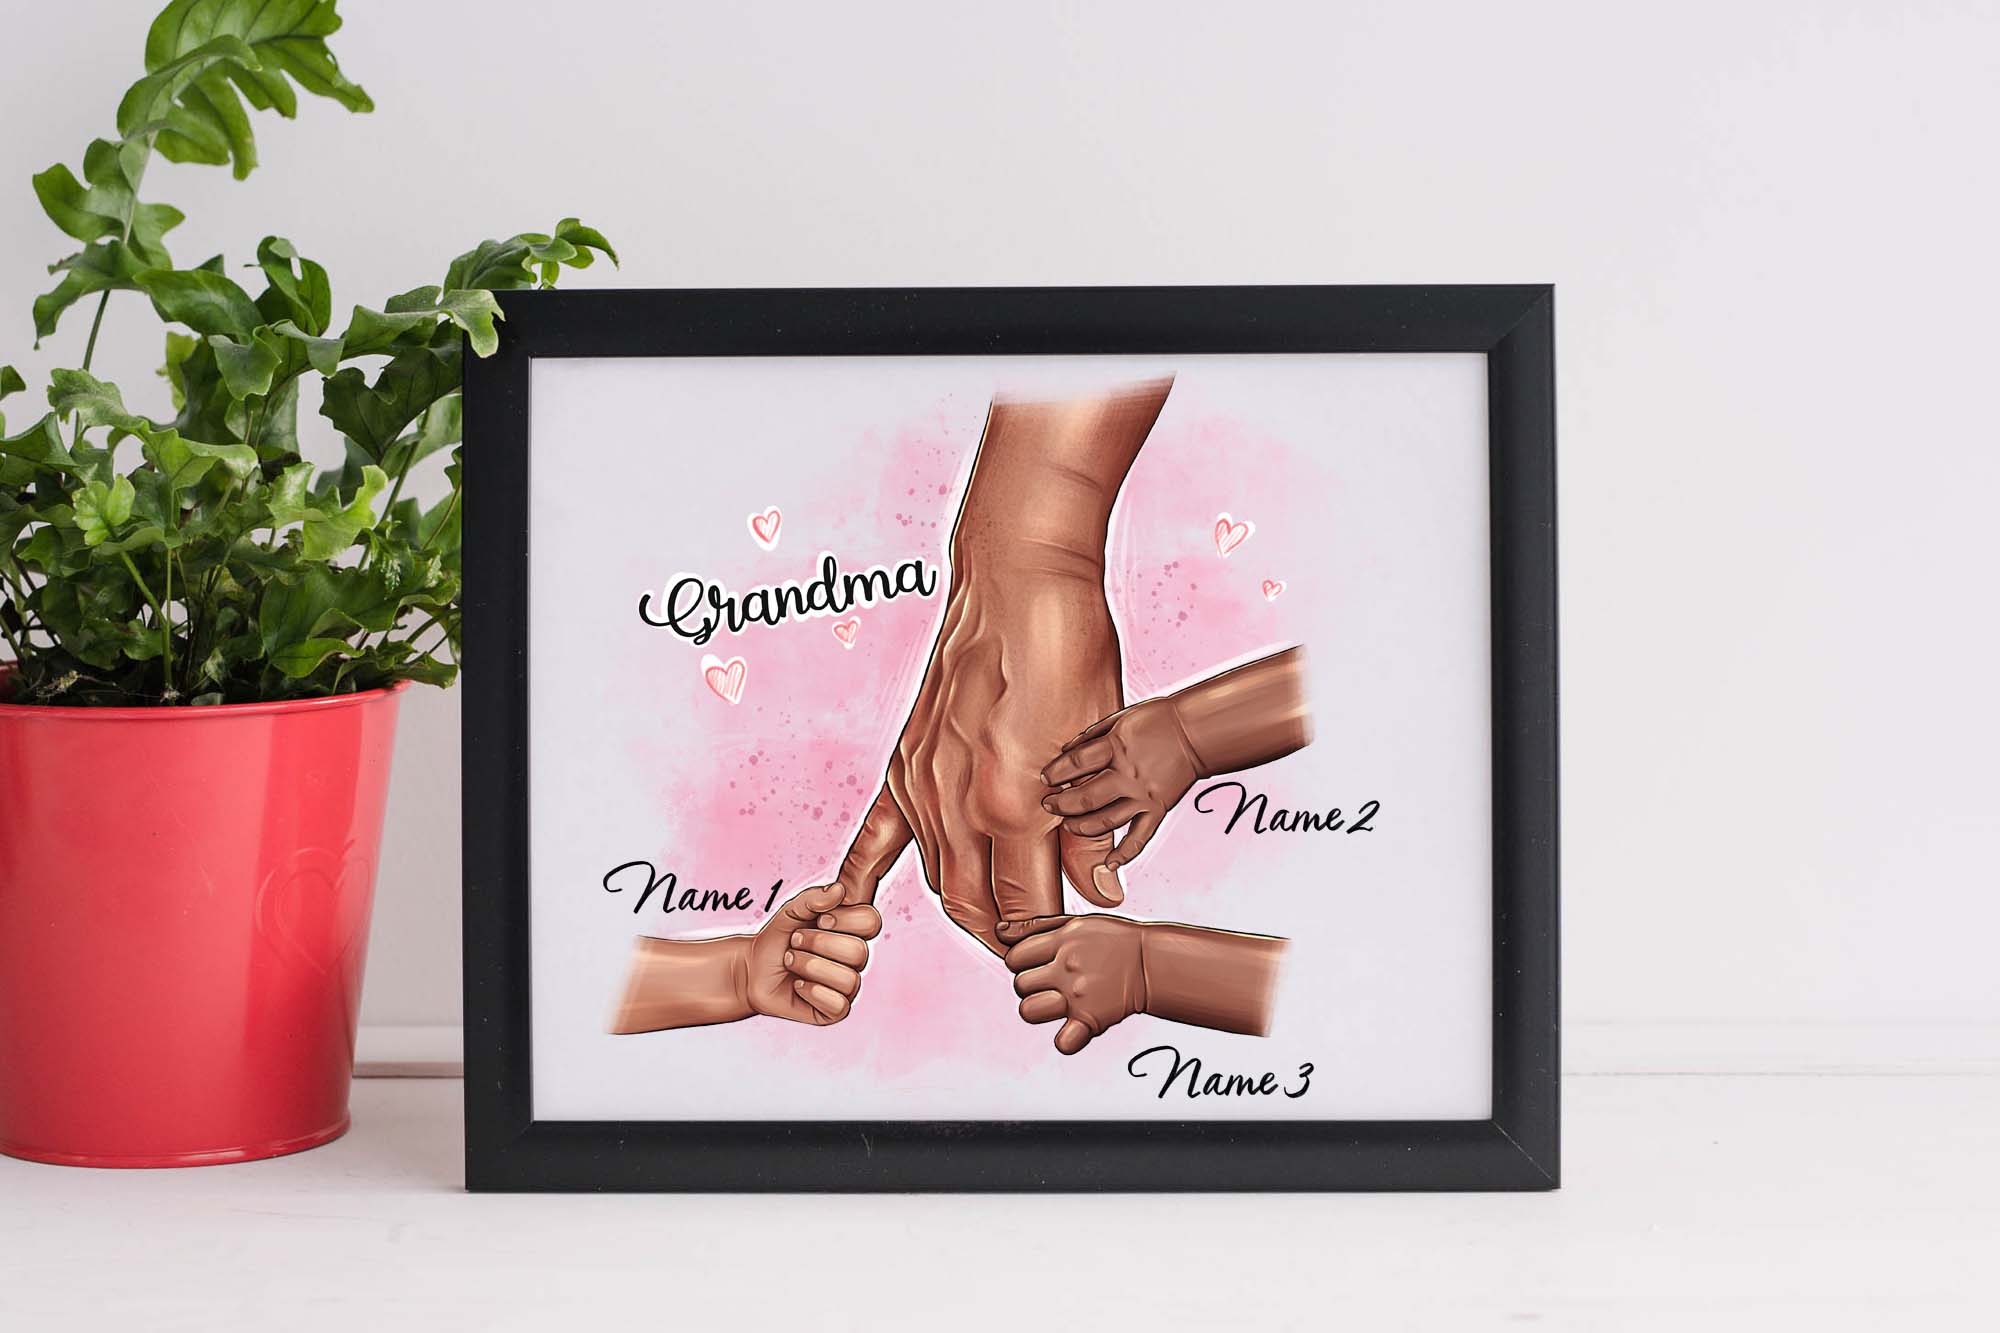 Parents And Kids Beautiful Family Clipart Black Frame Poster Print.